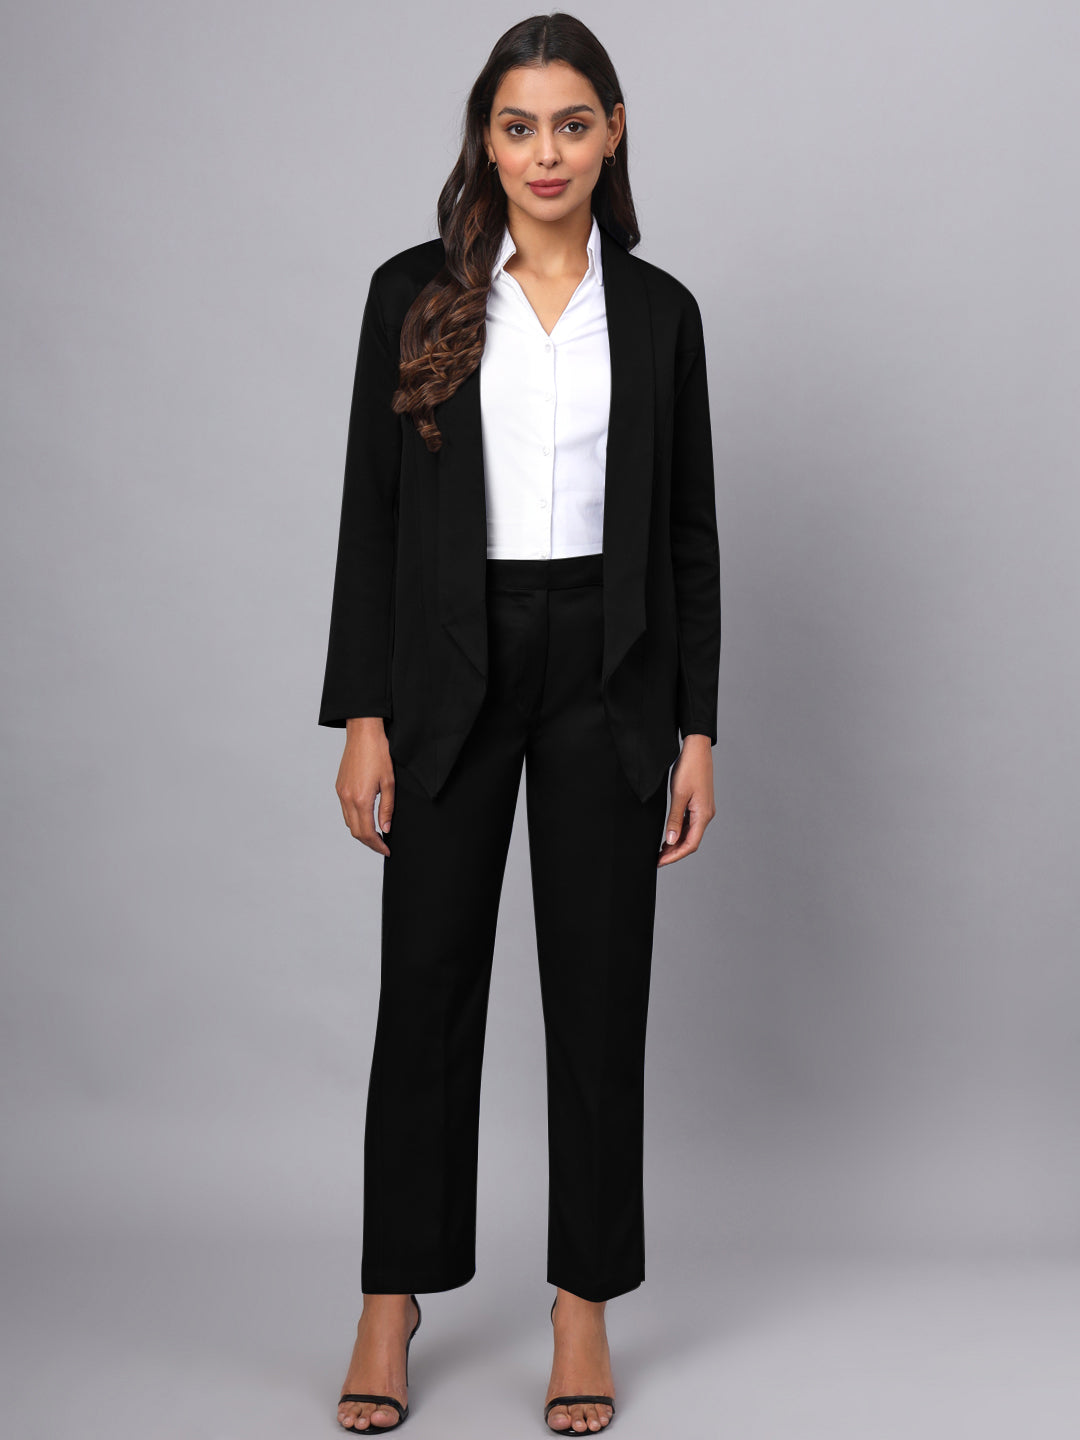 Shawl Collar Blazer With Trousers Two Pieces Formal Suit